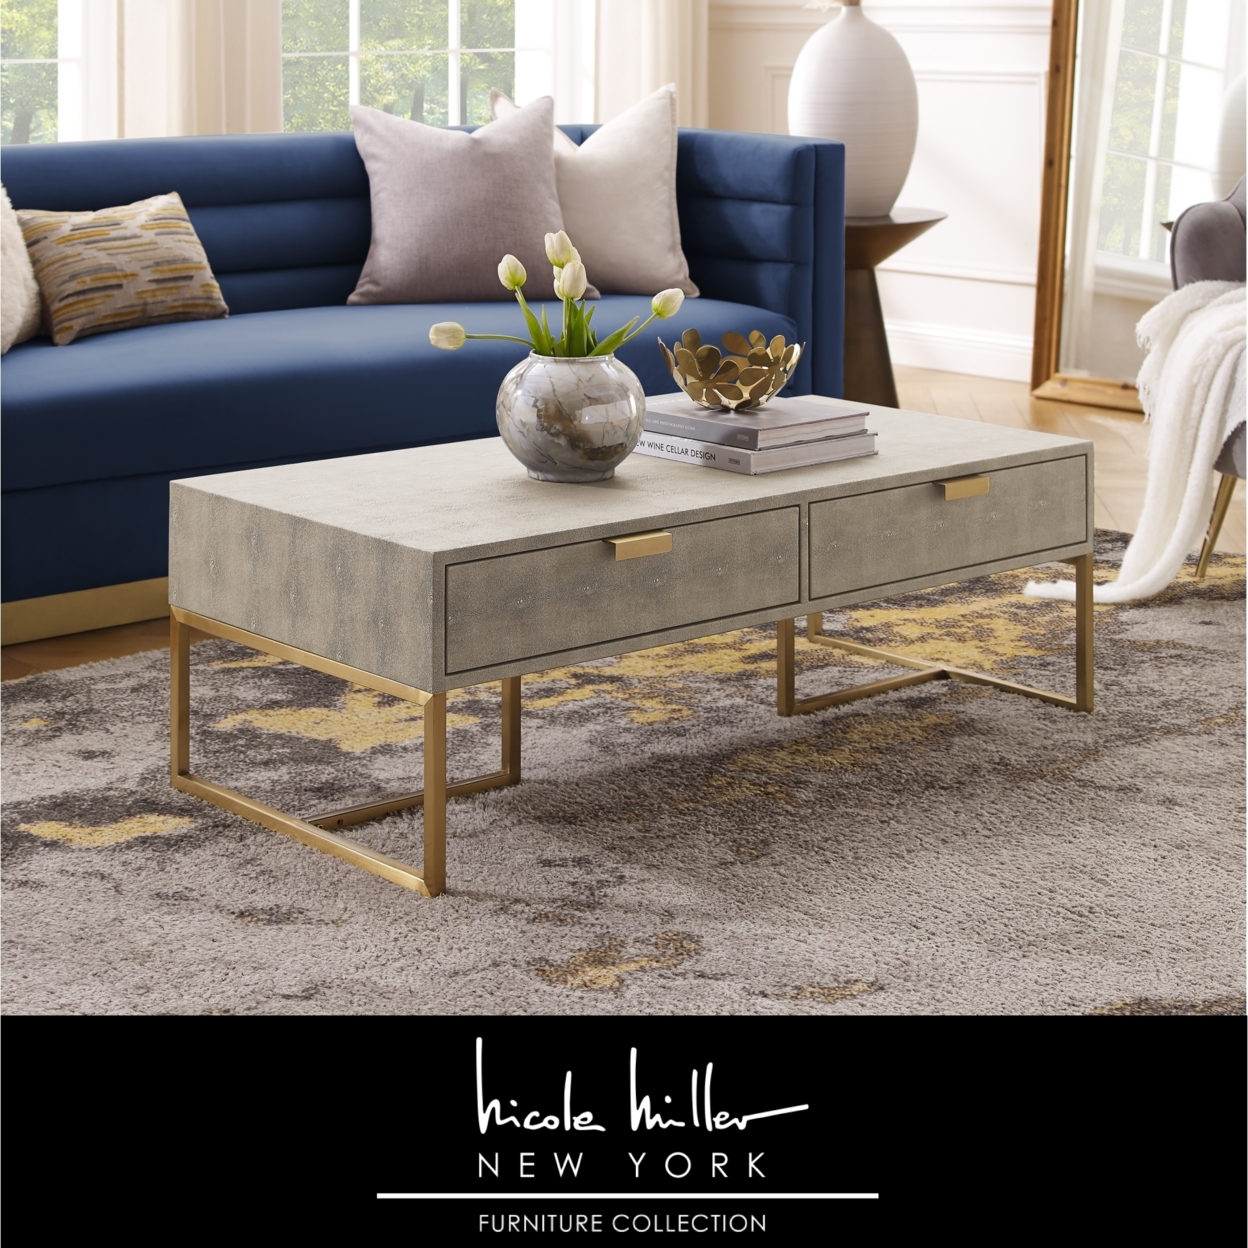 Isidro Coffee Table - 2 Drawers , Brushed Gold/Chrome Base And Handles , Stainless Steel Base - Cream White/gold